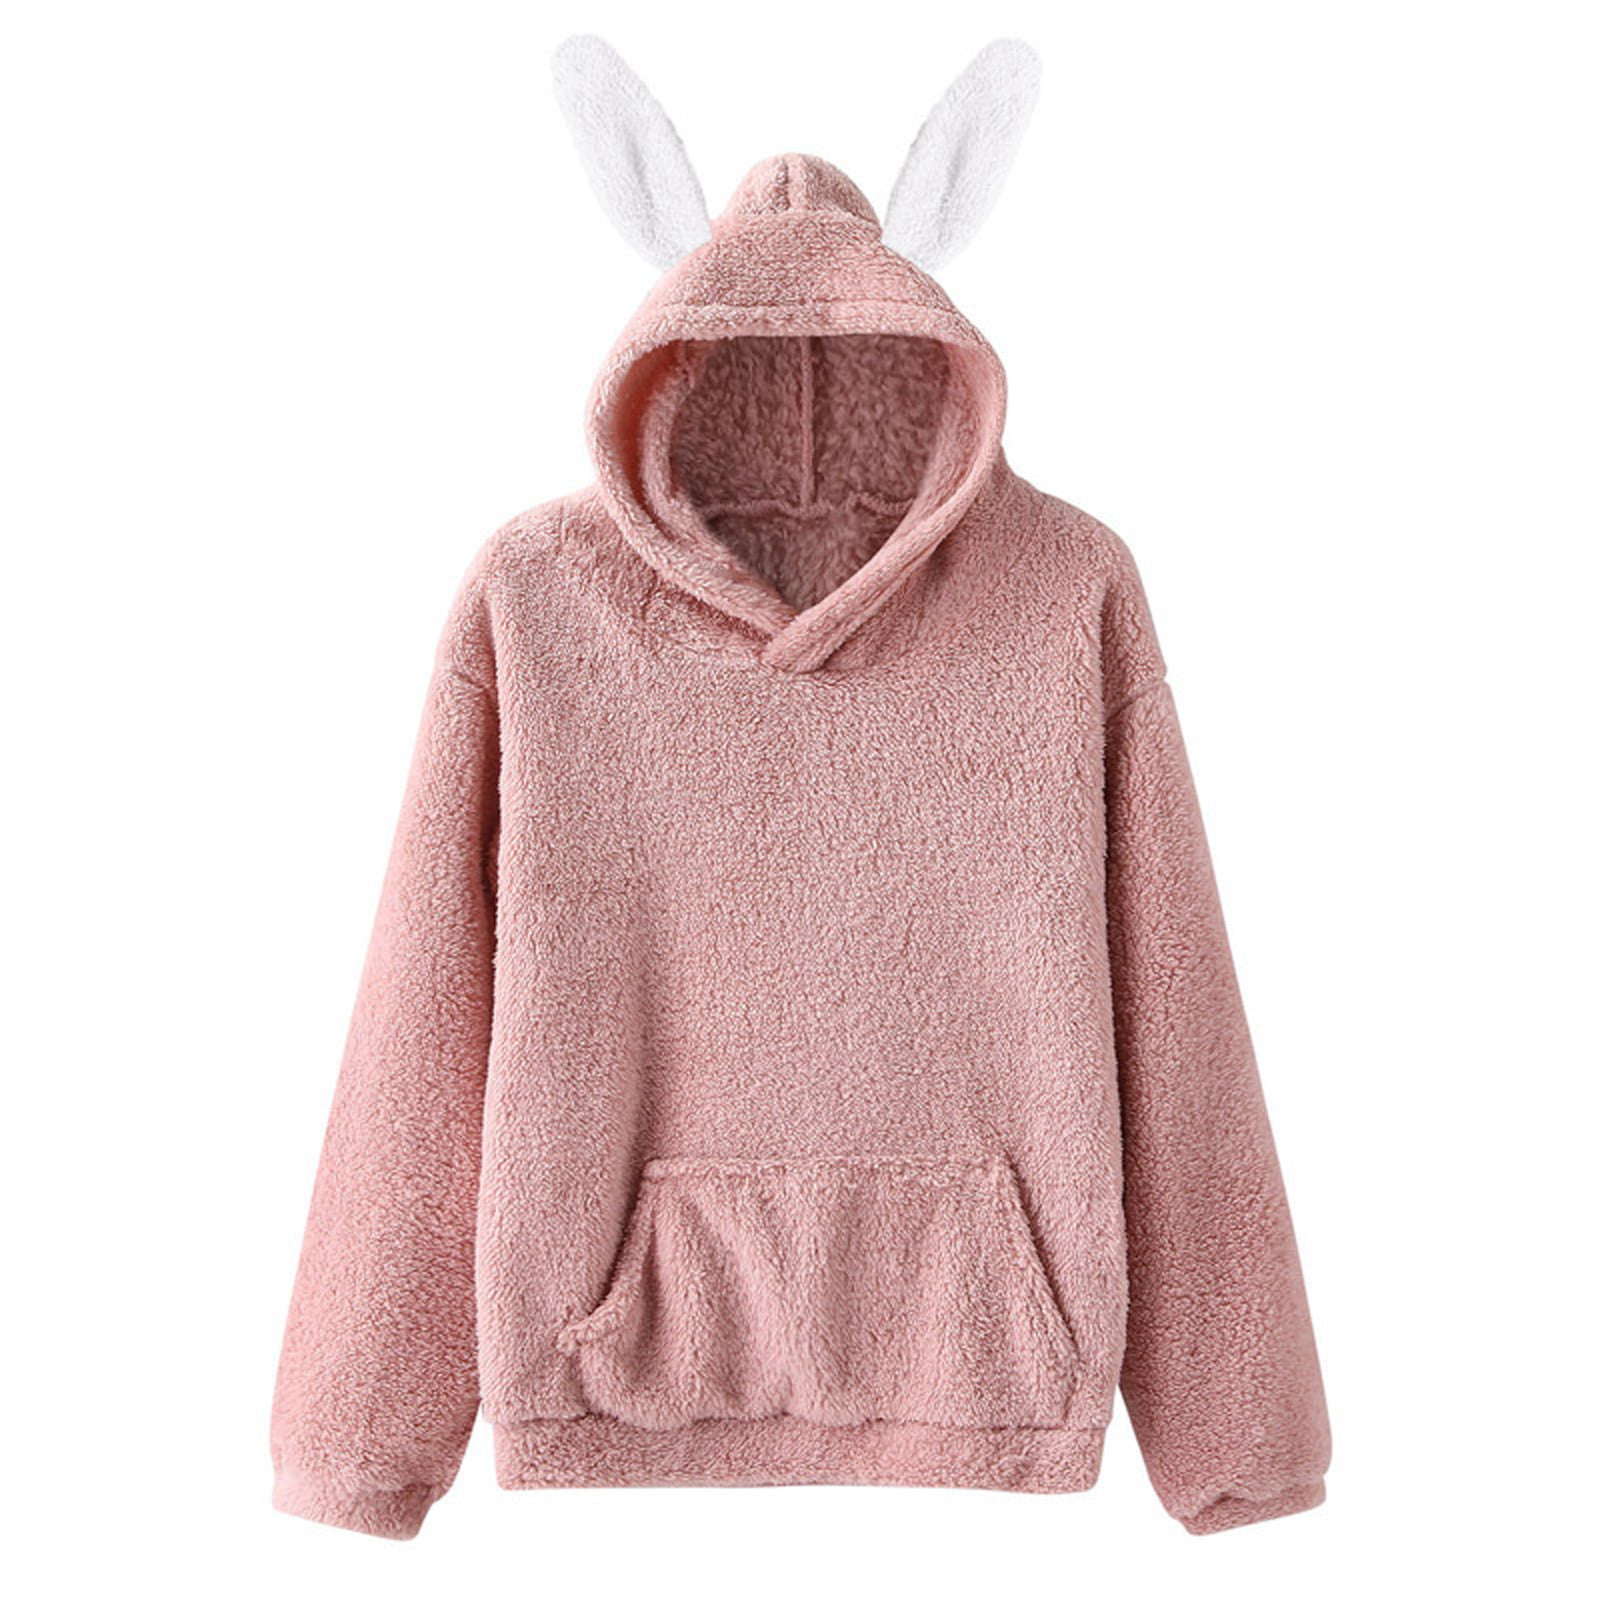 Pullover for Womens Oversized Hoodies Solid Drawstring Blouse Casual Long Sleeve Fuzzy Fleece Sweatshirts with Pocket 